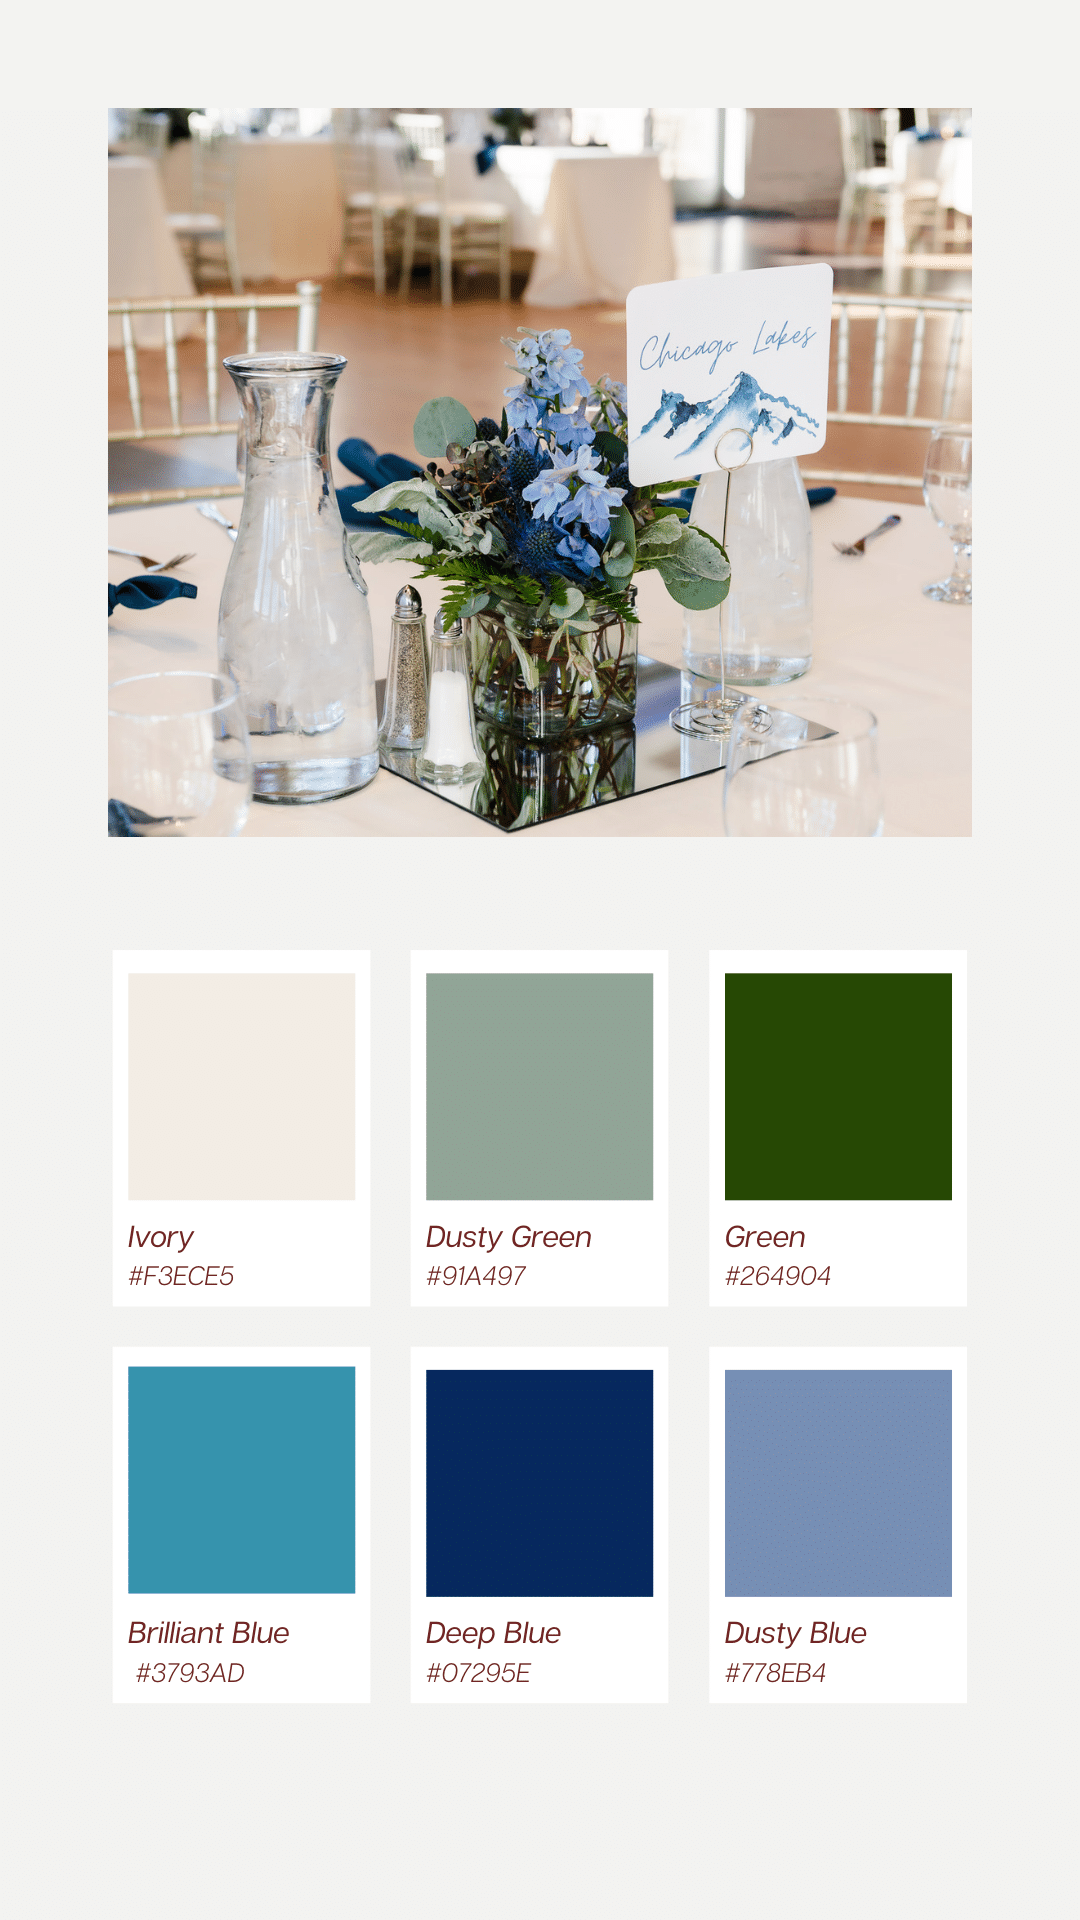 View of a wedding table and a color palette of six color chips including ivory, dusty green, green, brilliant blue, deep blue, and dusty blue.